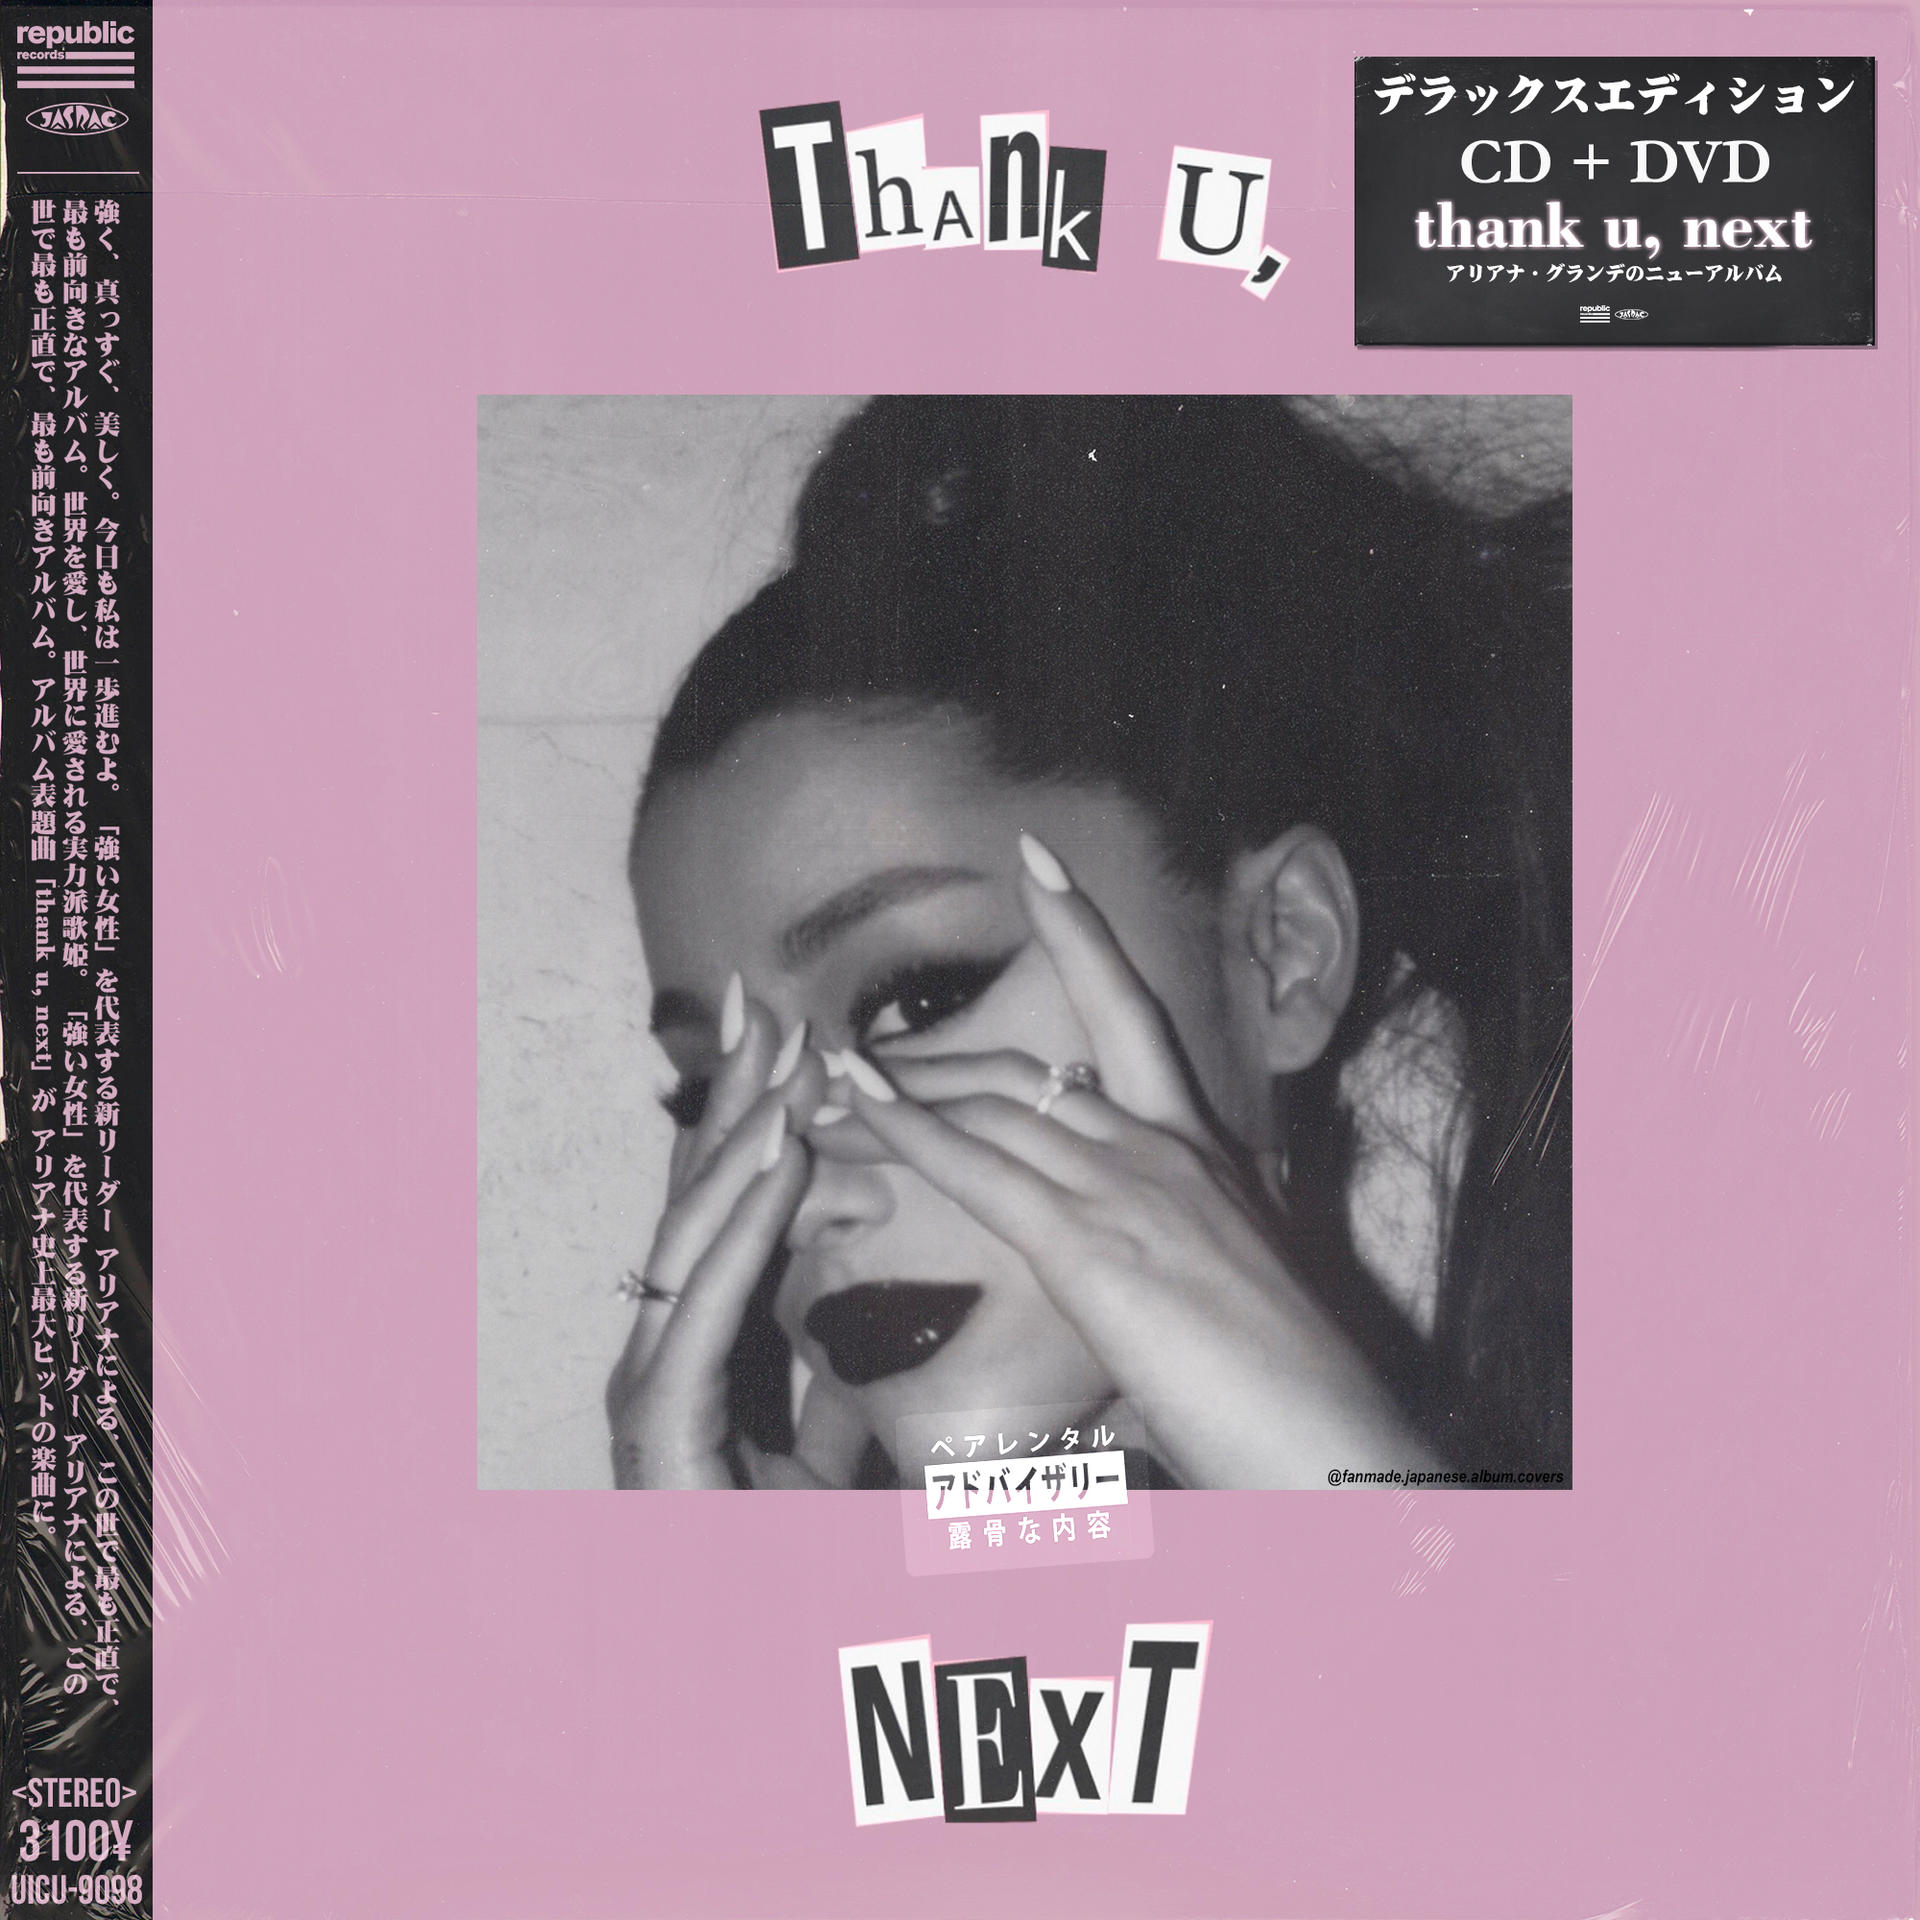 Ariana Grande - thank u, next Fanmade Cover 2 by fnmadejapanesecovers on  DeviantArt